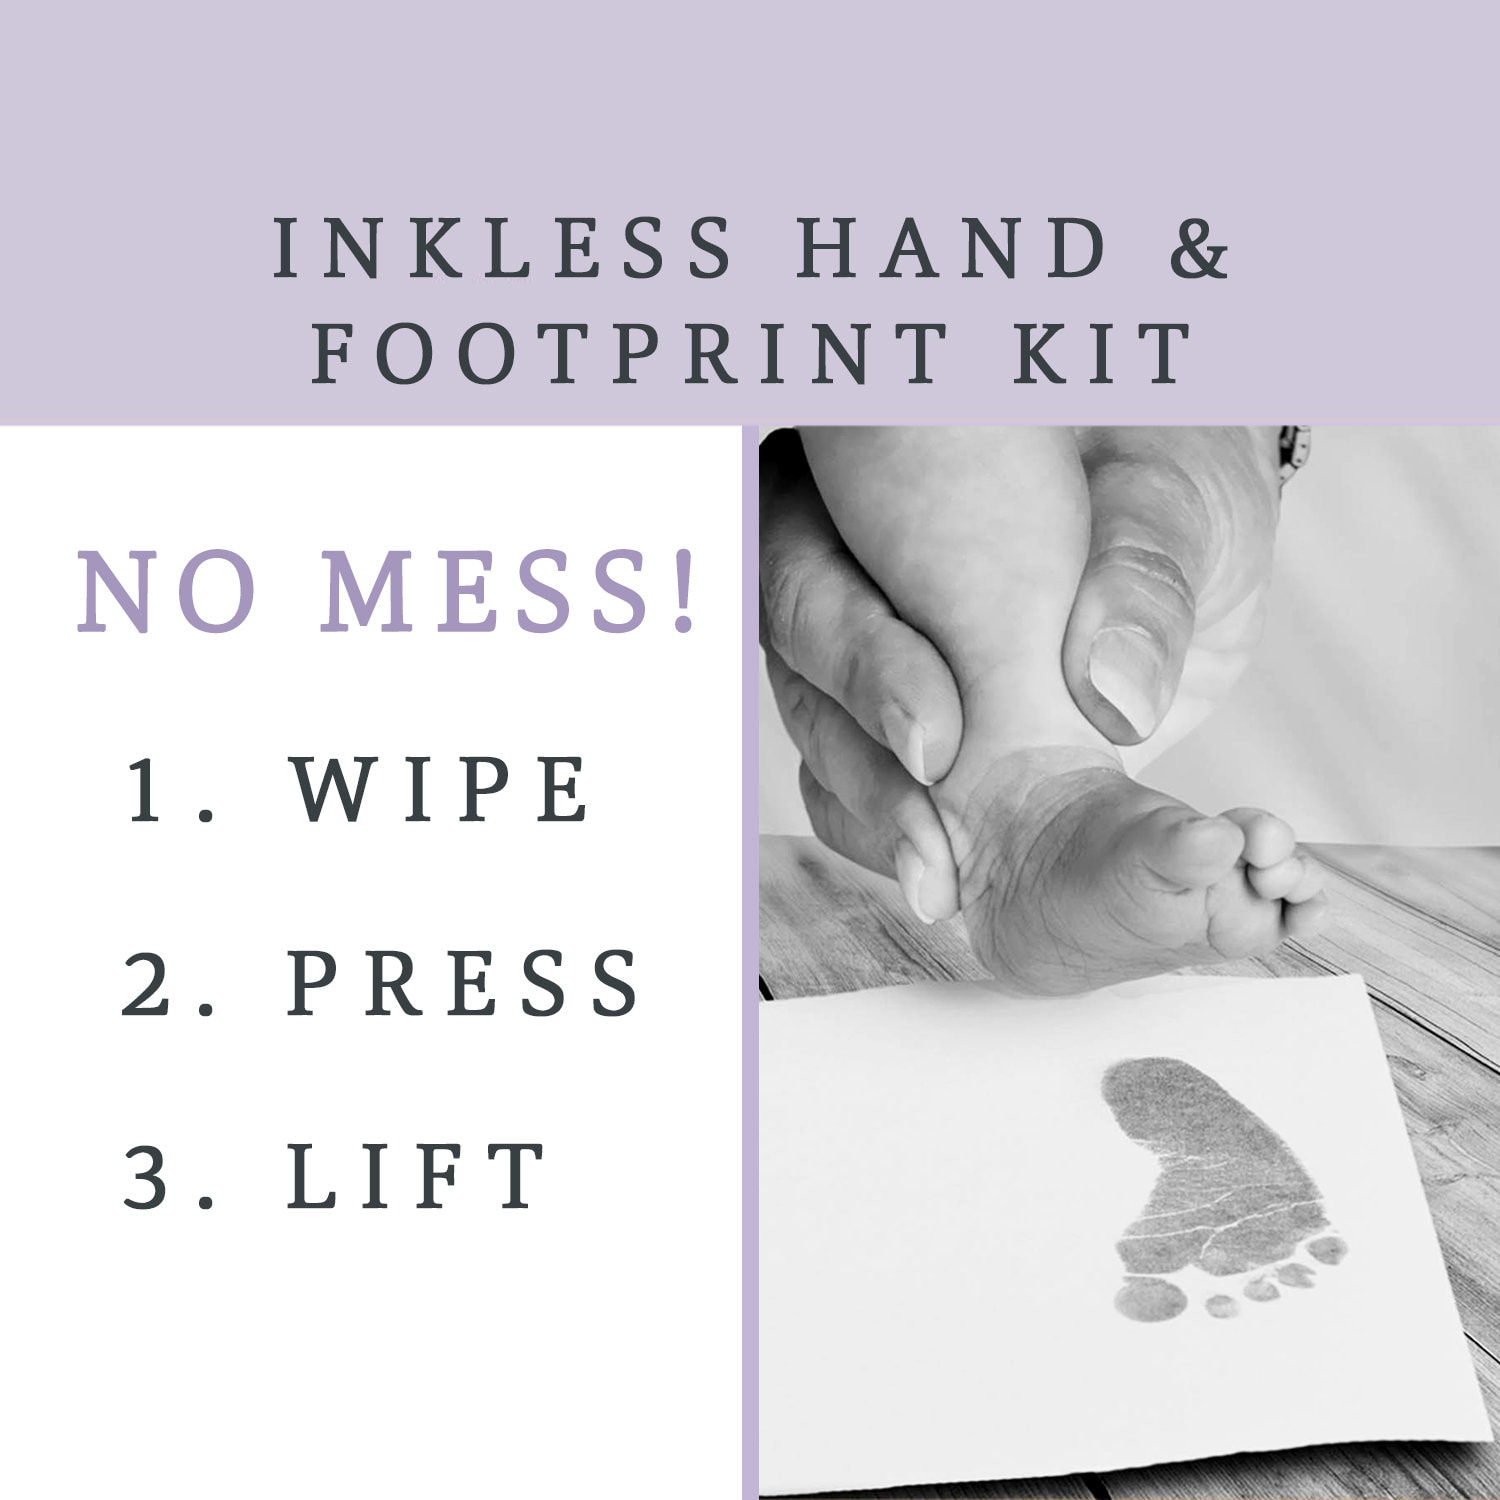 Inkless Handprint and Footprint Kit, No Mess Baby Hand Prints Foot Prints,  Includes Magic Wipes, Paper, and Instruction Sheet